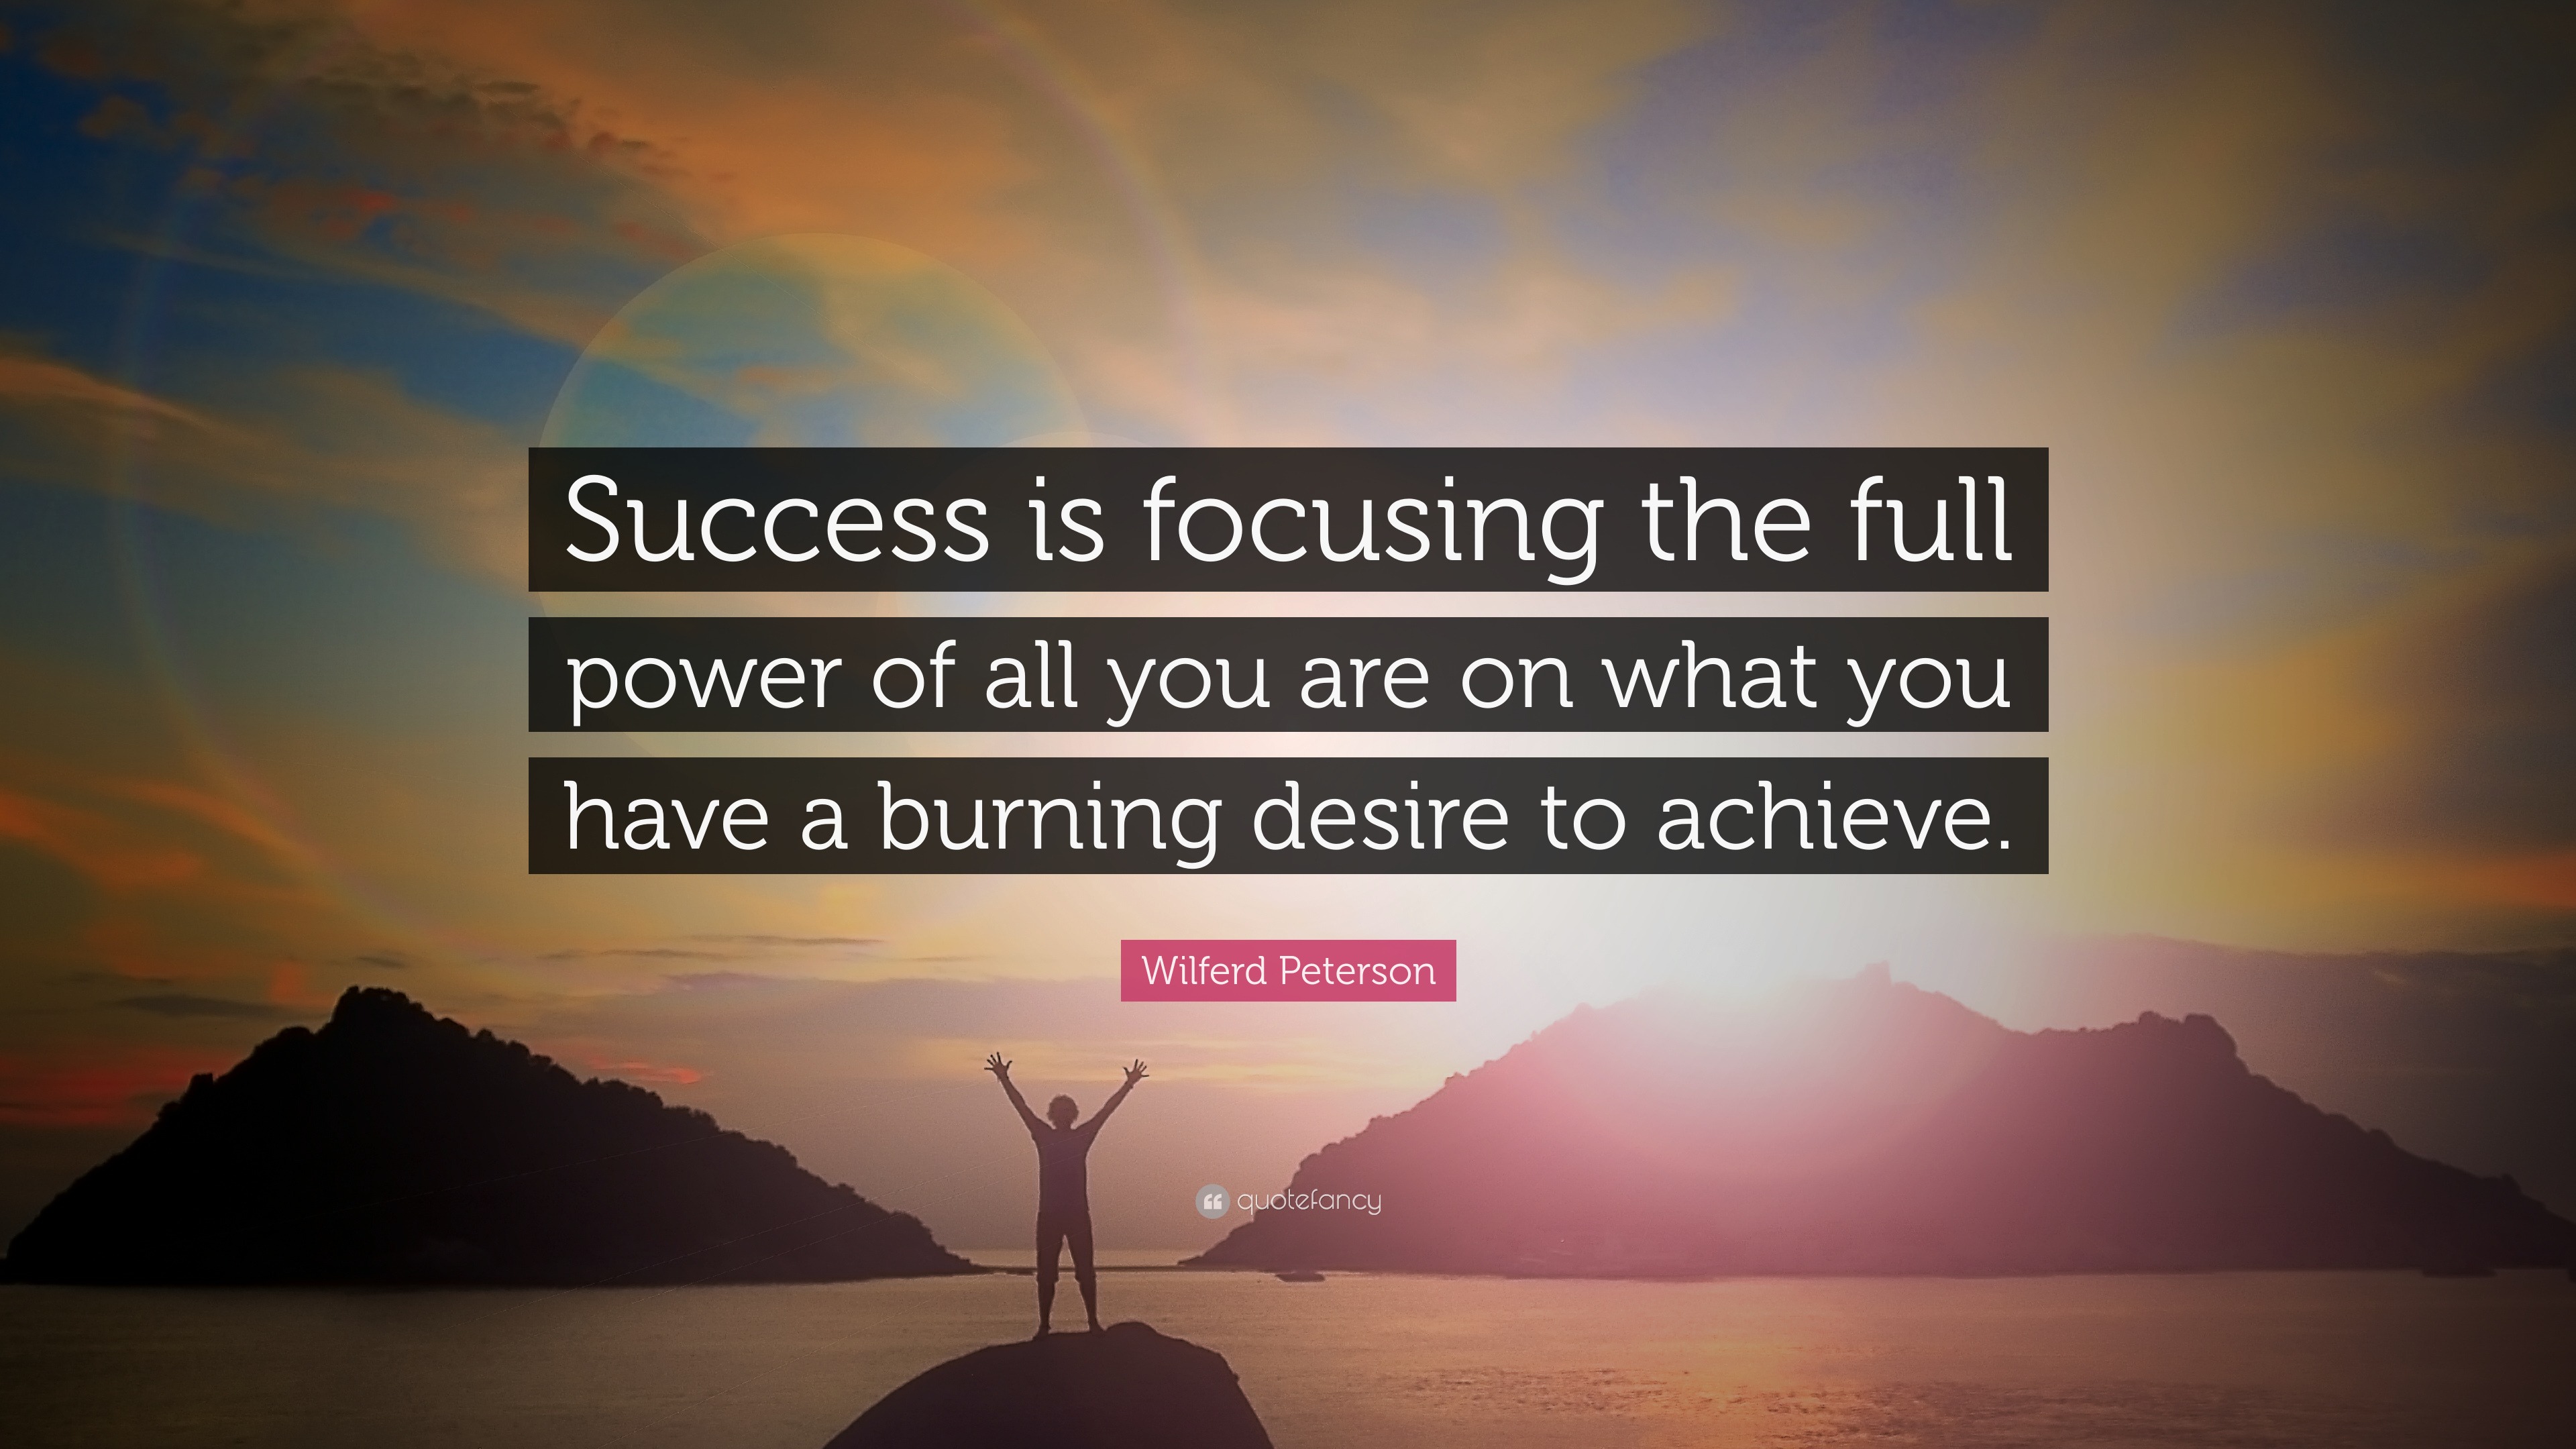 Wilferd Peterson Quote: “Success is focusing the full power of all you ...